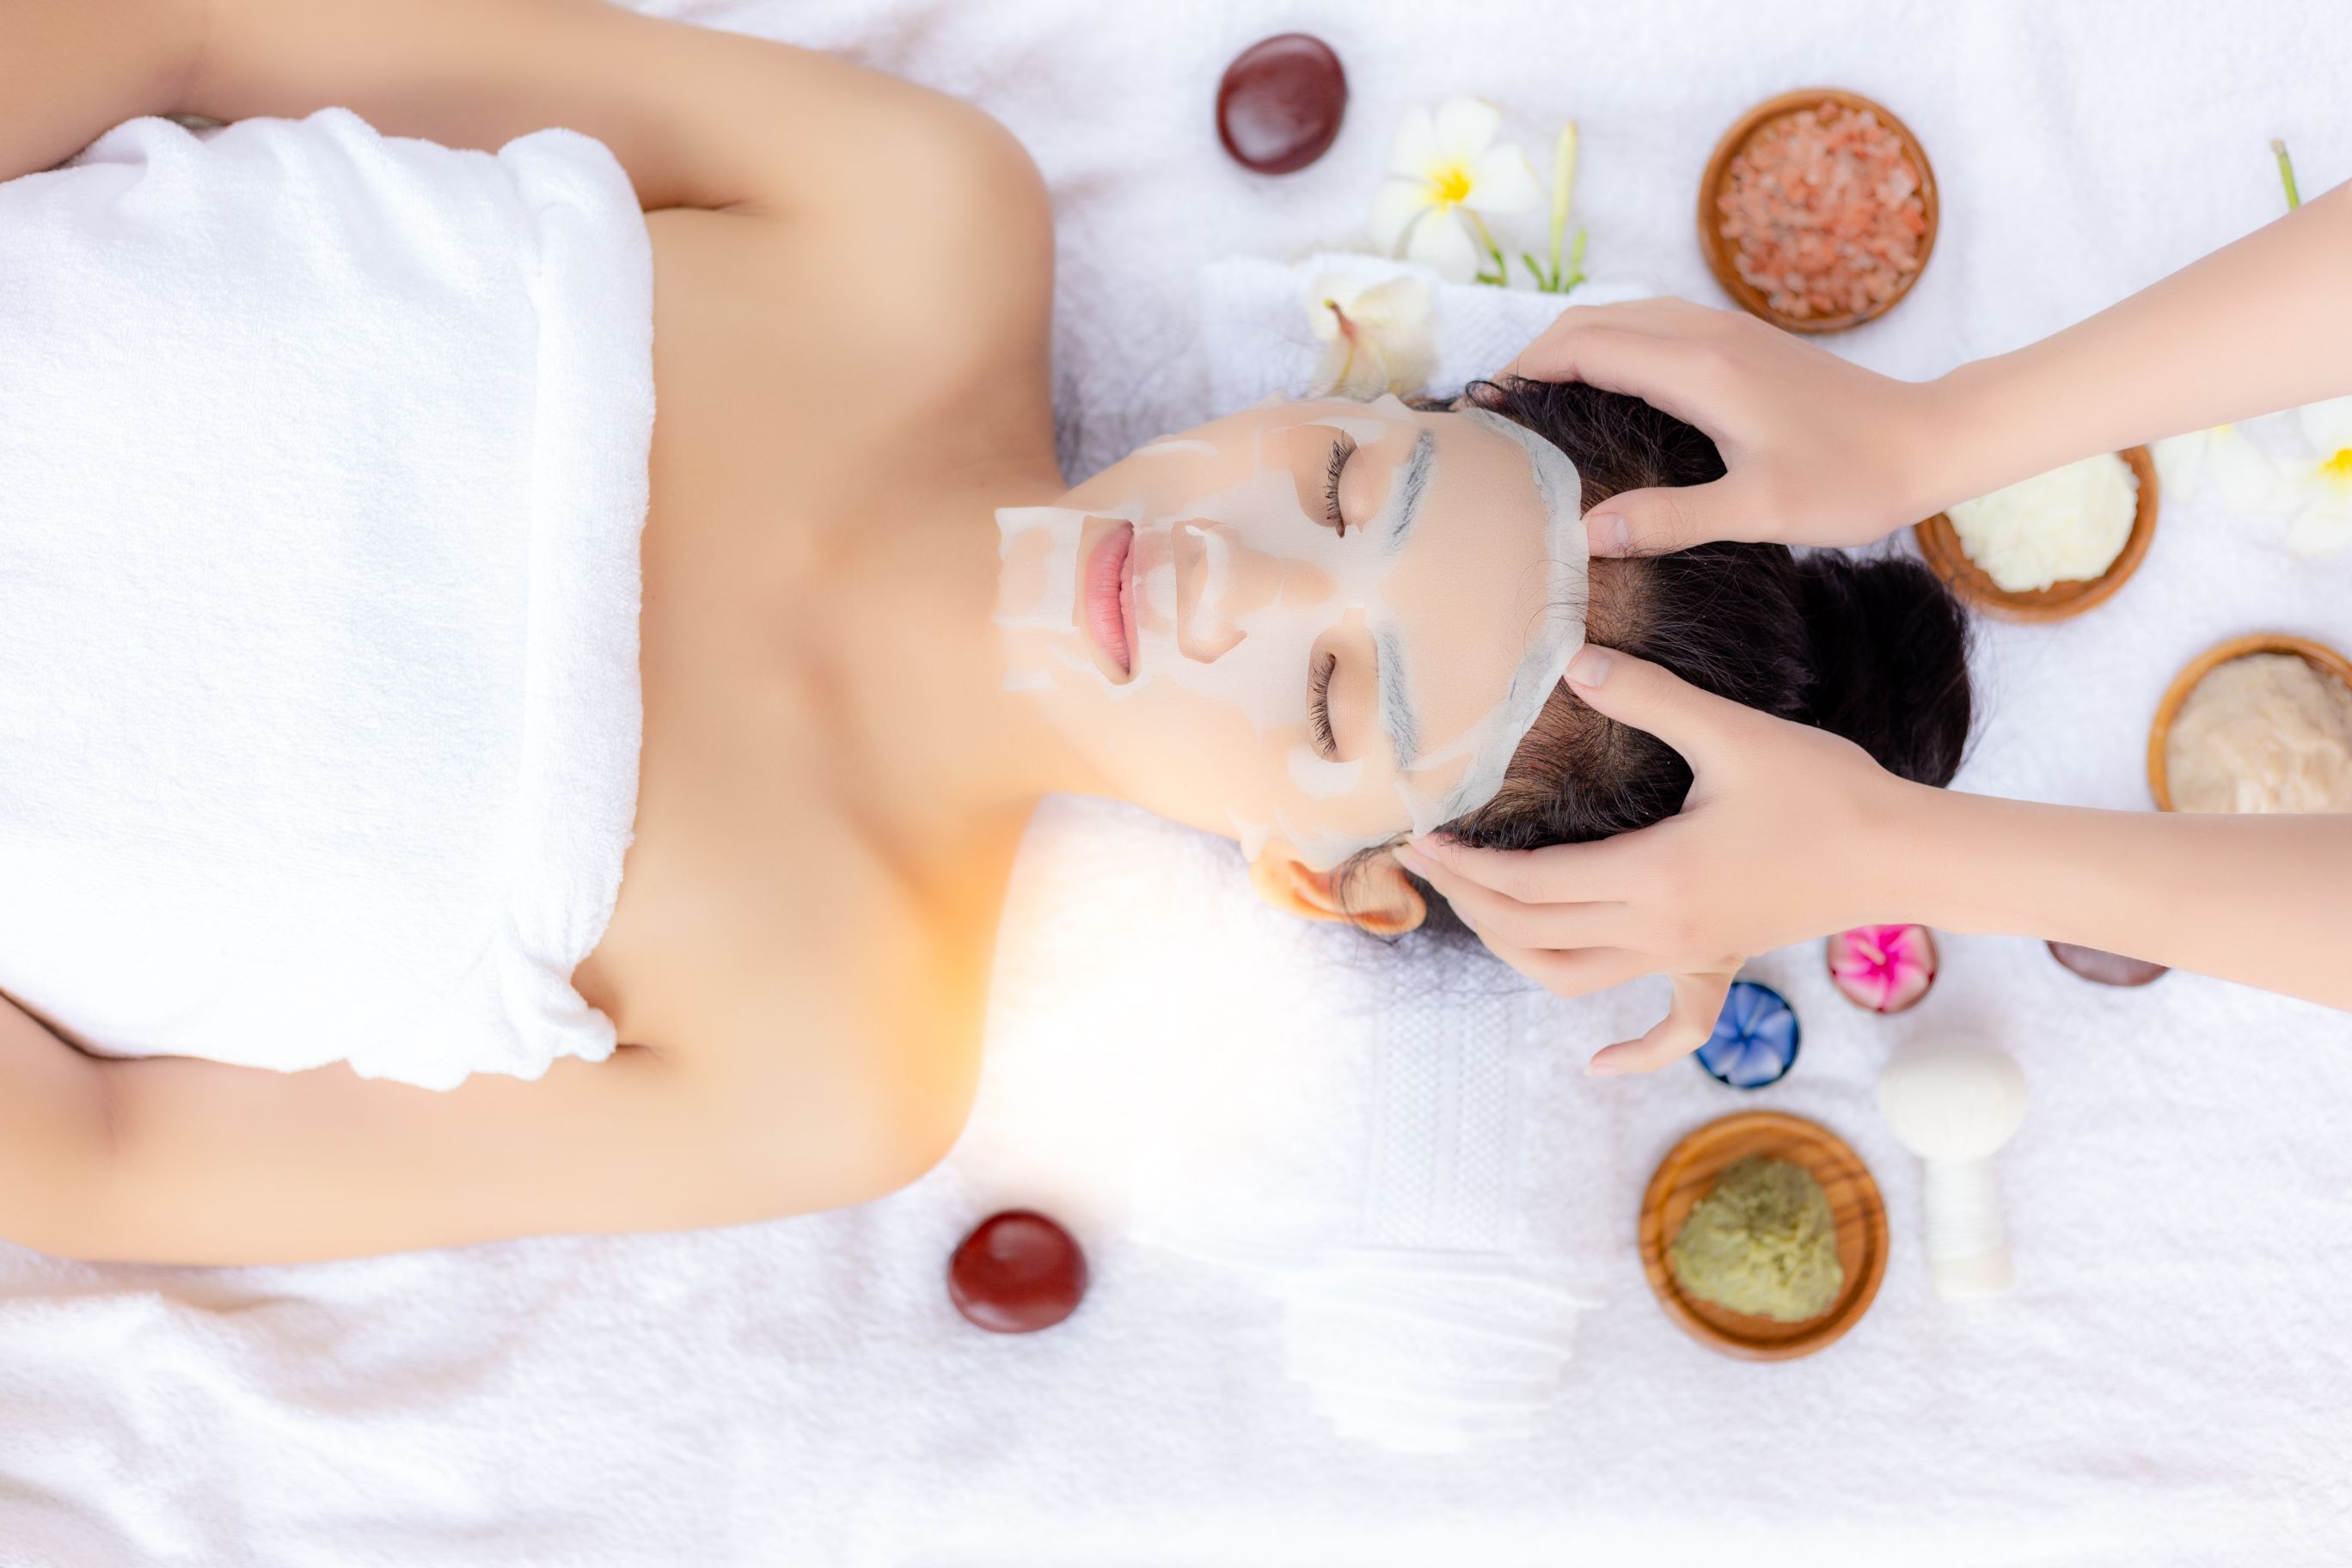 60-min HydraCollagen 24k Ultrasonic Facial for 1 person at Spa Infinity - Get Deals, Cashback and Rewards with ShopBack GO